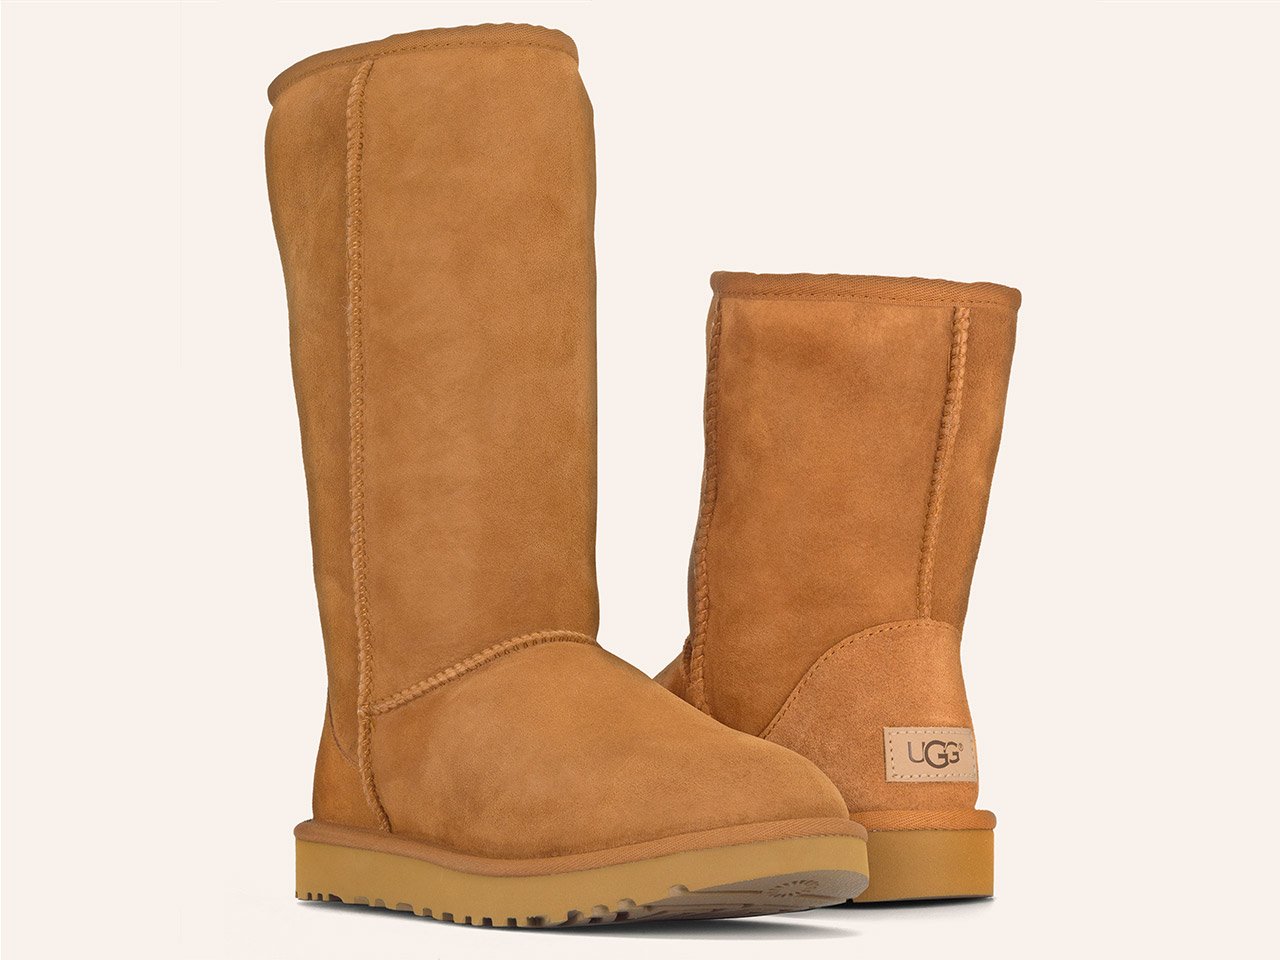 11 Best Kids Ugg Boots To Shop For Winter in 2023